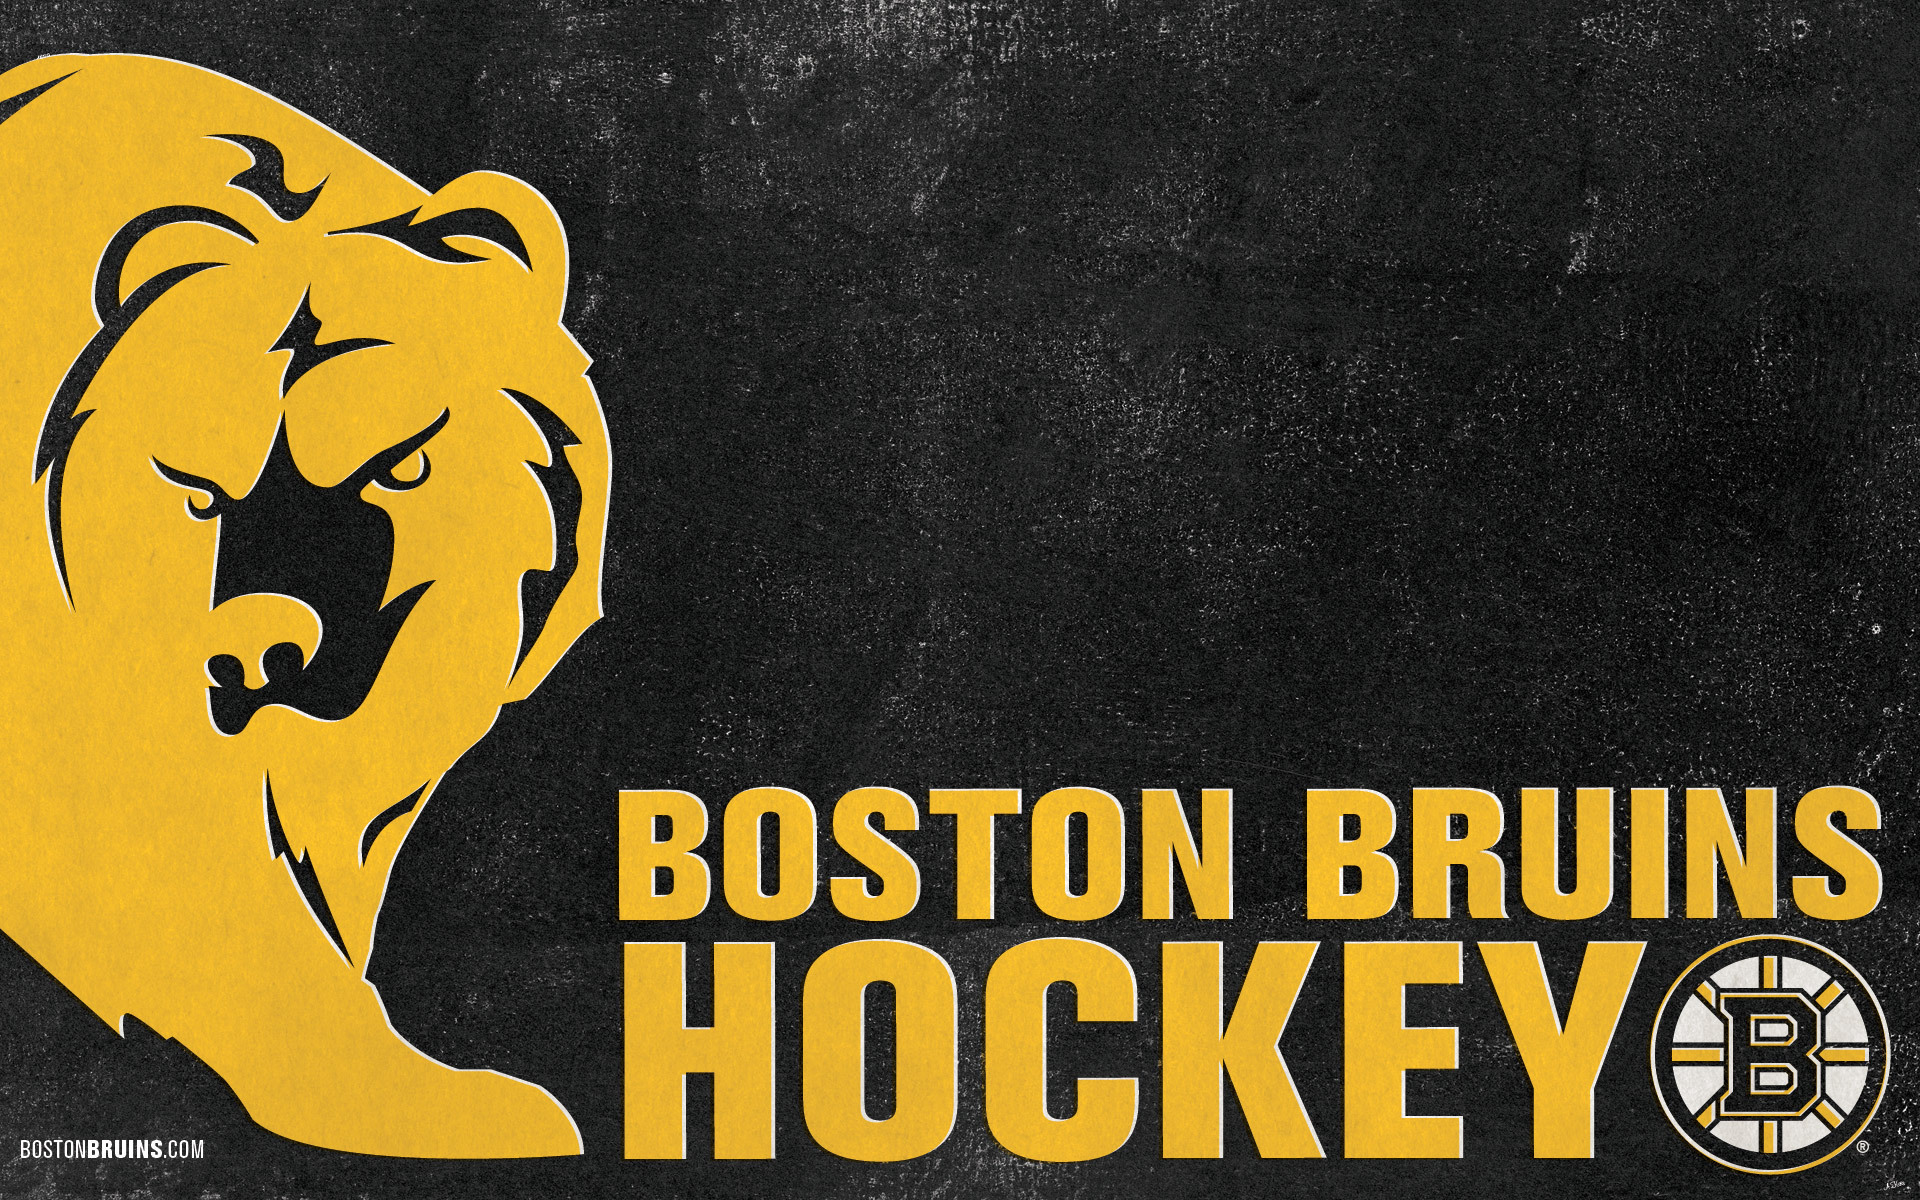 Boston Bruins Image Logo HD Wallpaper And Background